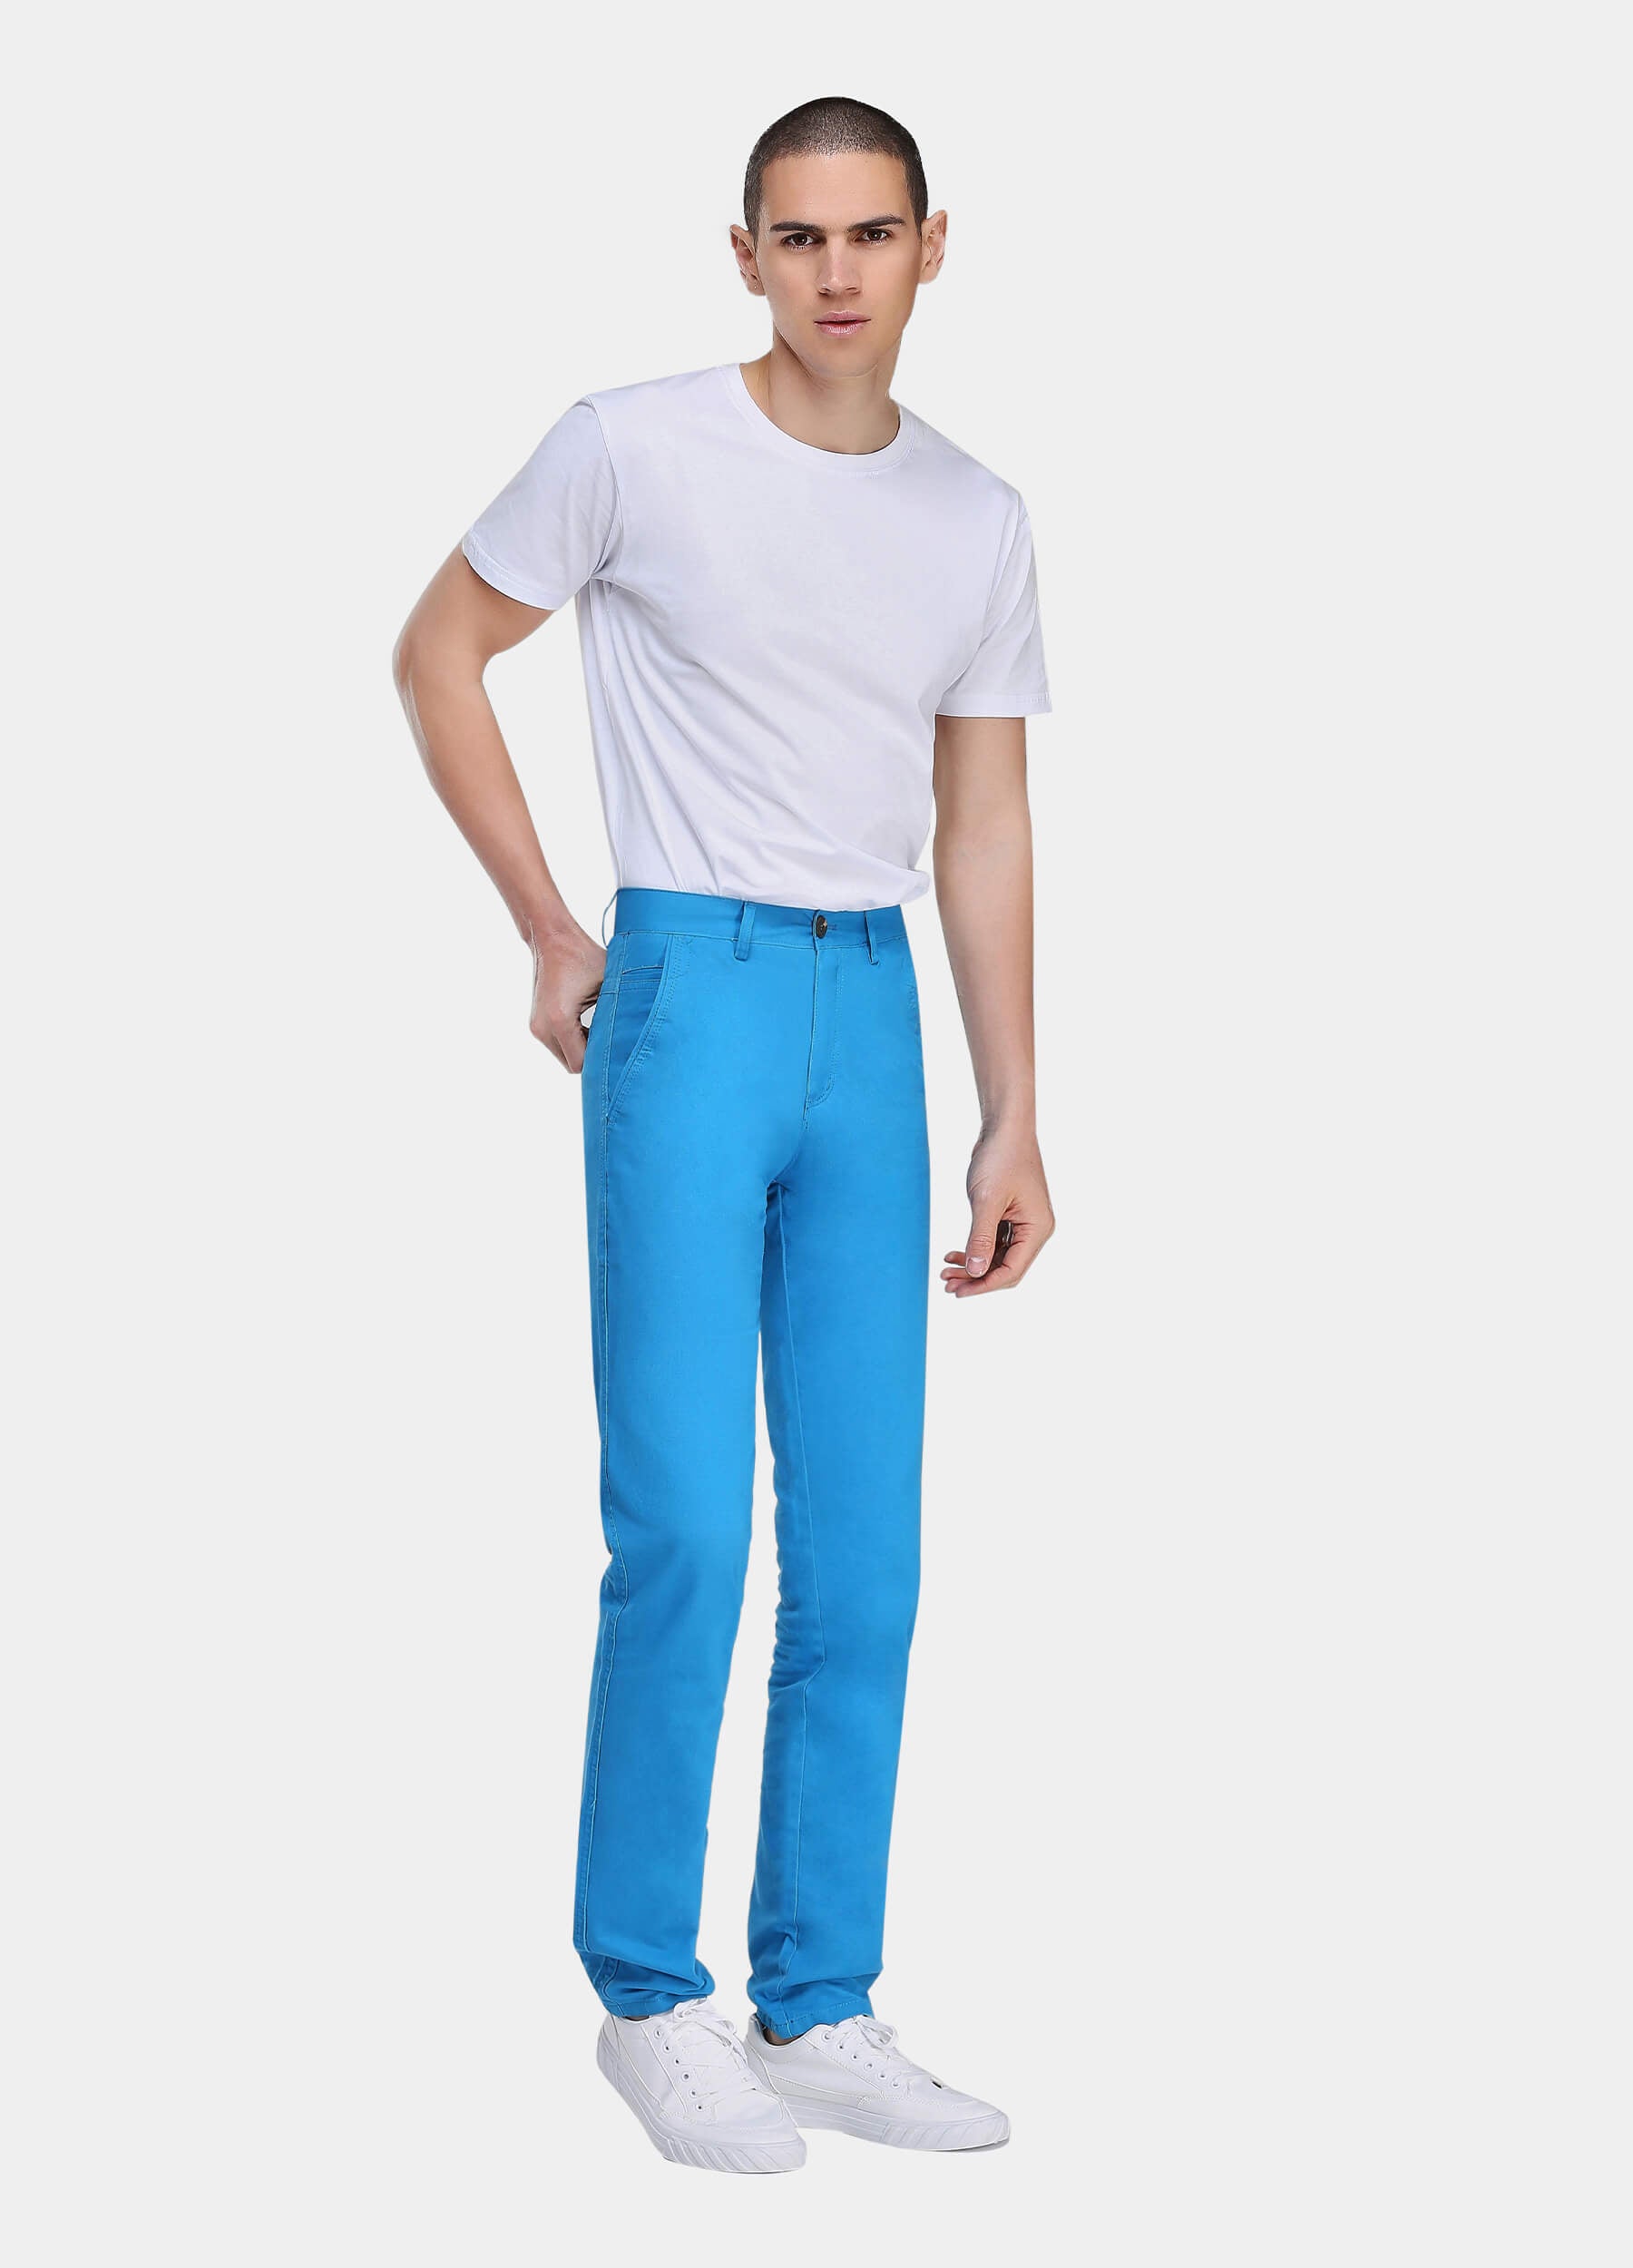 1PA1 Men's Fall Straight Leg Zip Fly Button Closure Slant Pocket Casual Trousers-Blue side view